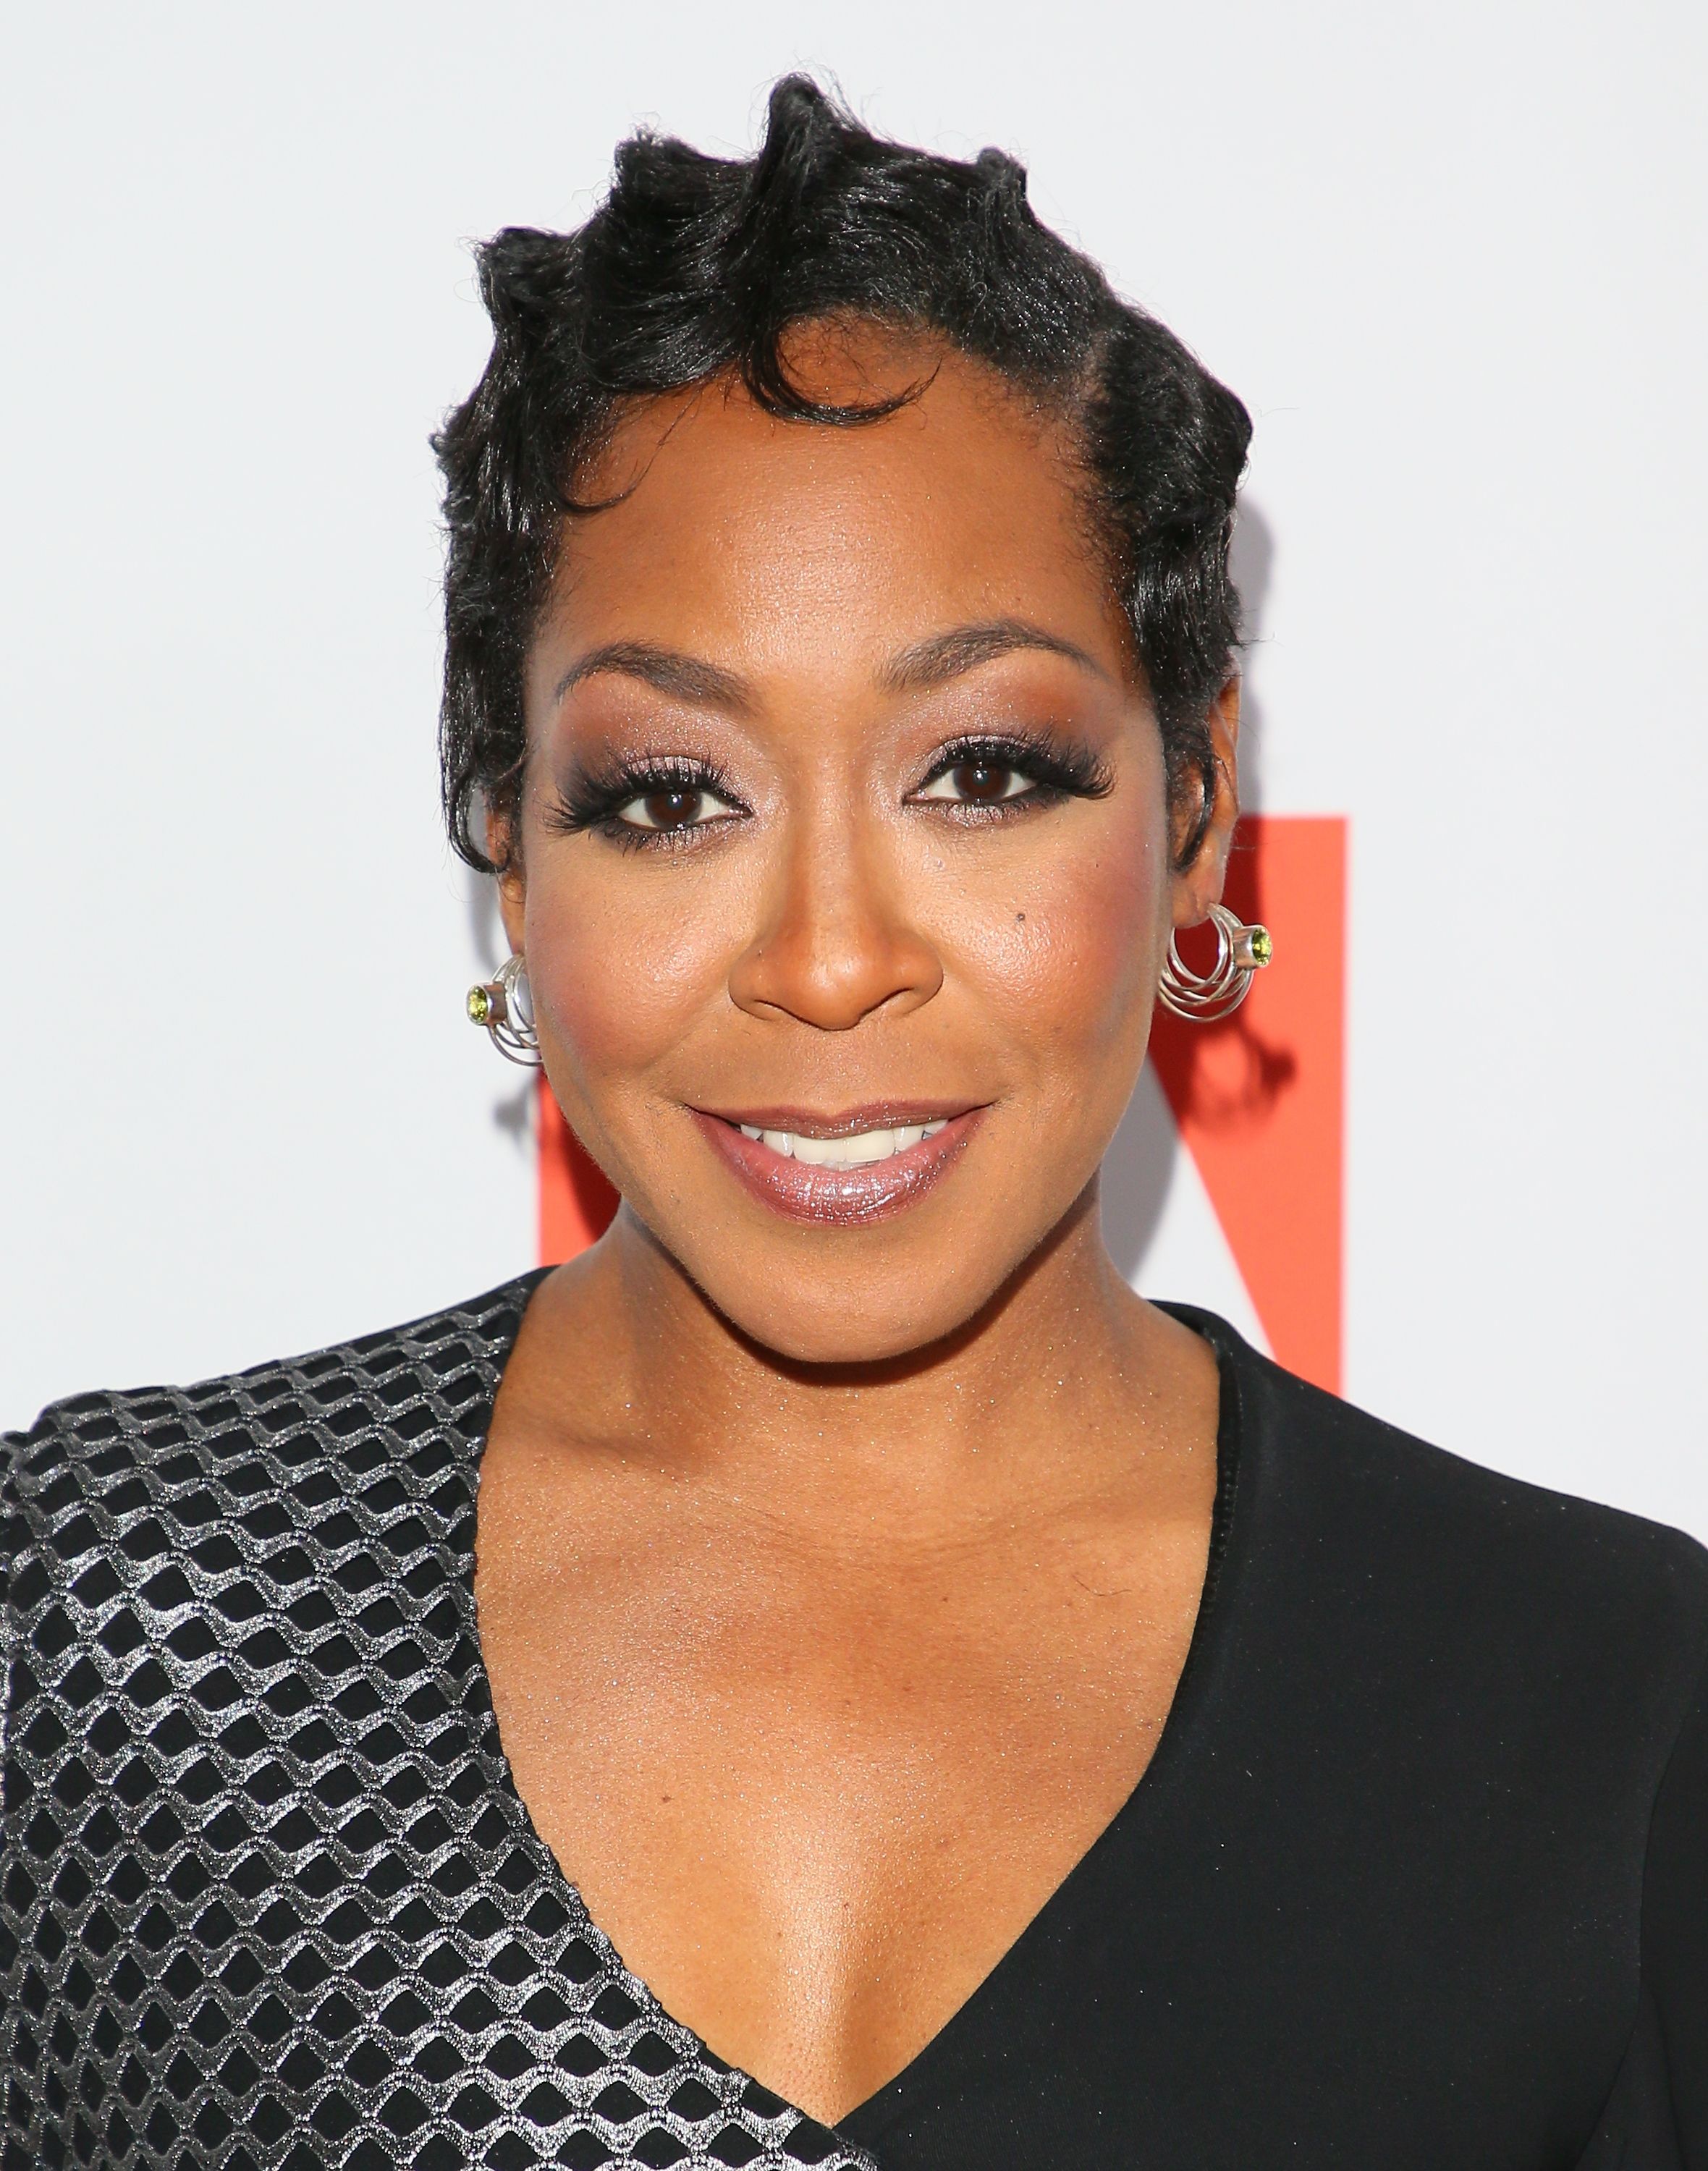 Tichina Arnold attends the 68th Annual ACE Eddie Awards on January 27, 2018 in Beverly Hills, California. | Source: Getty Images